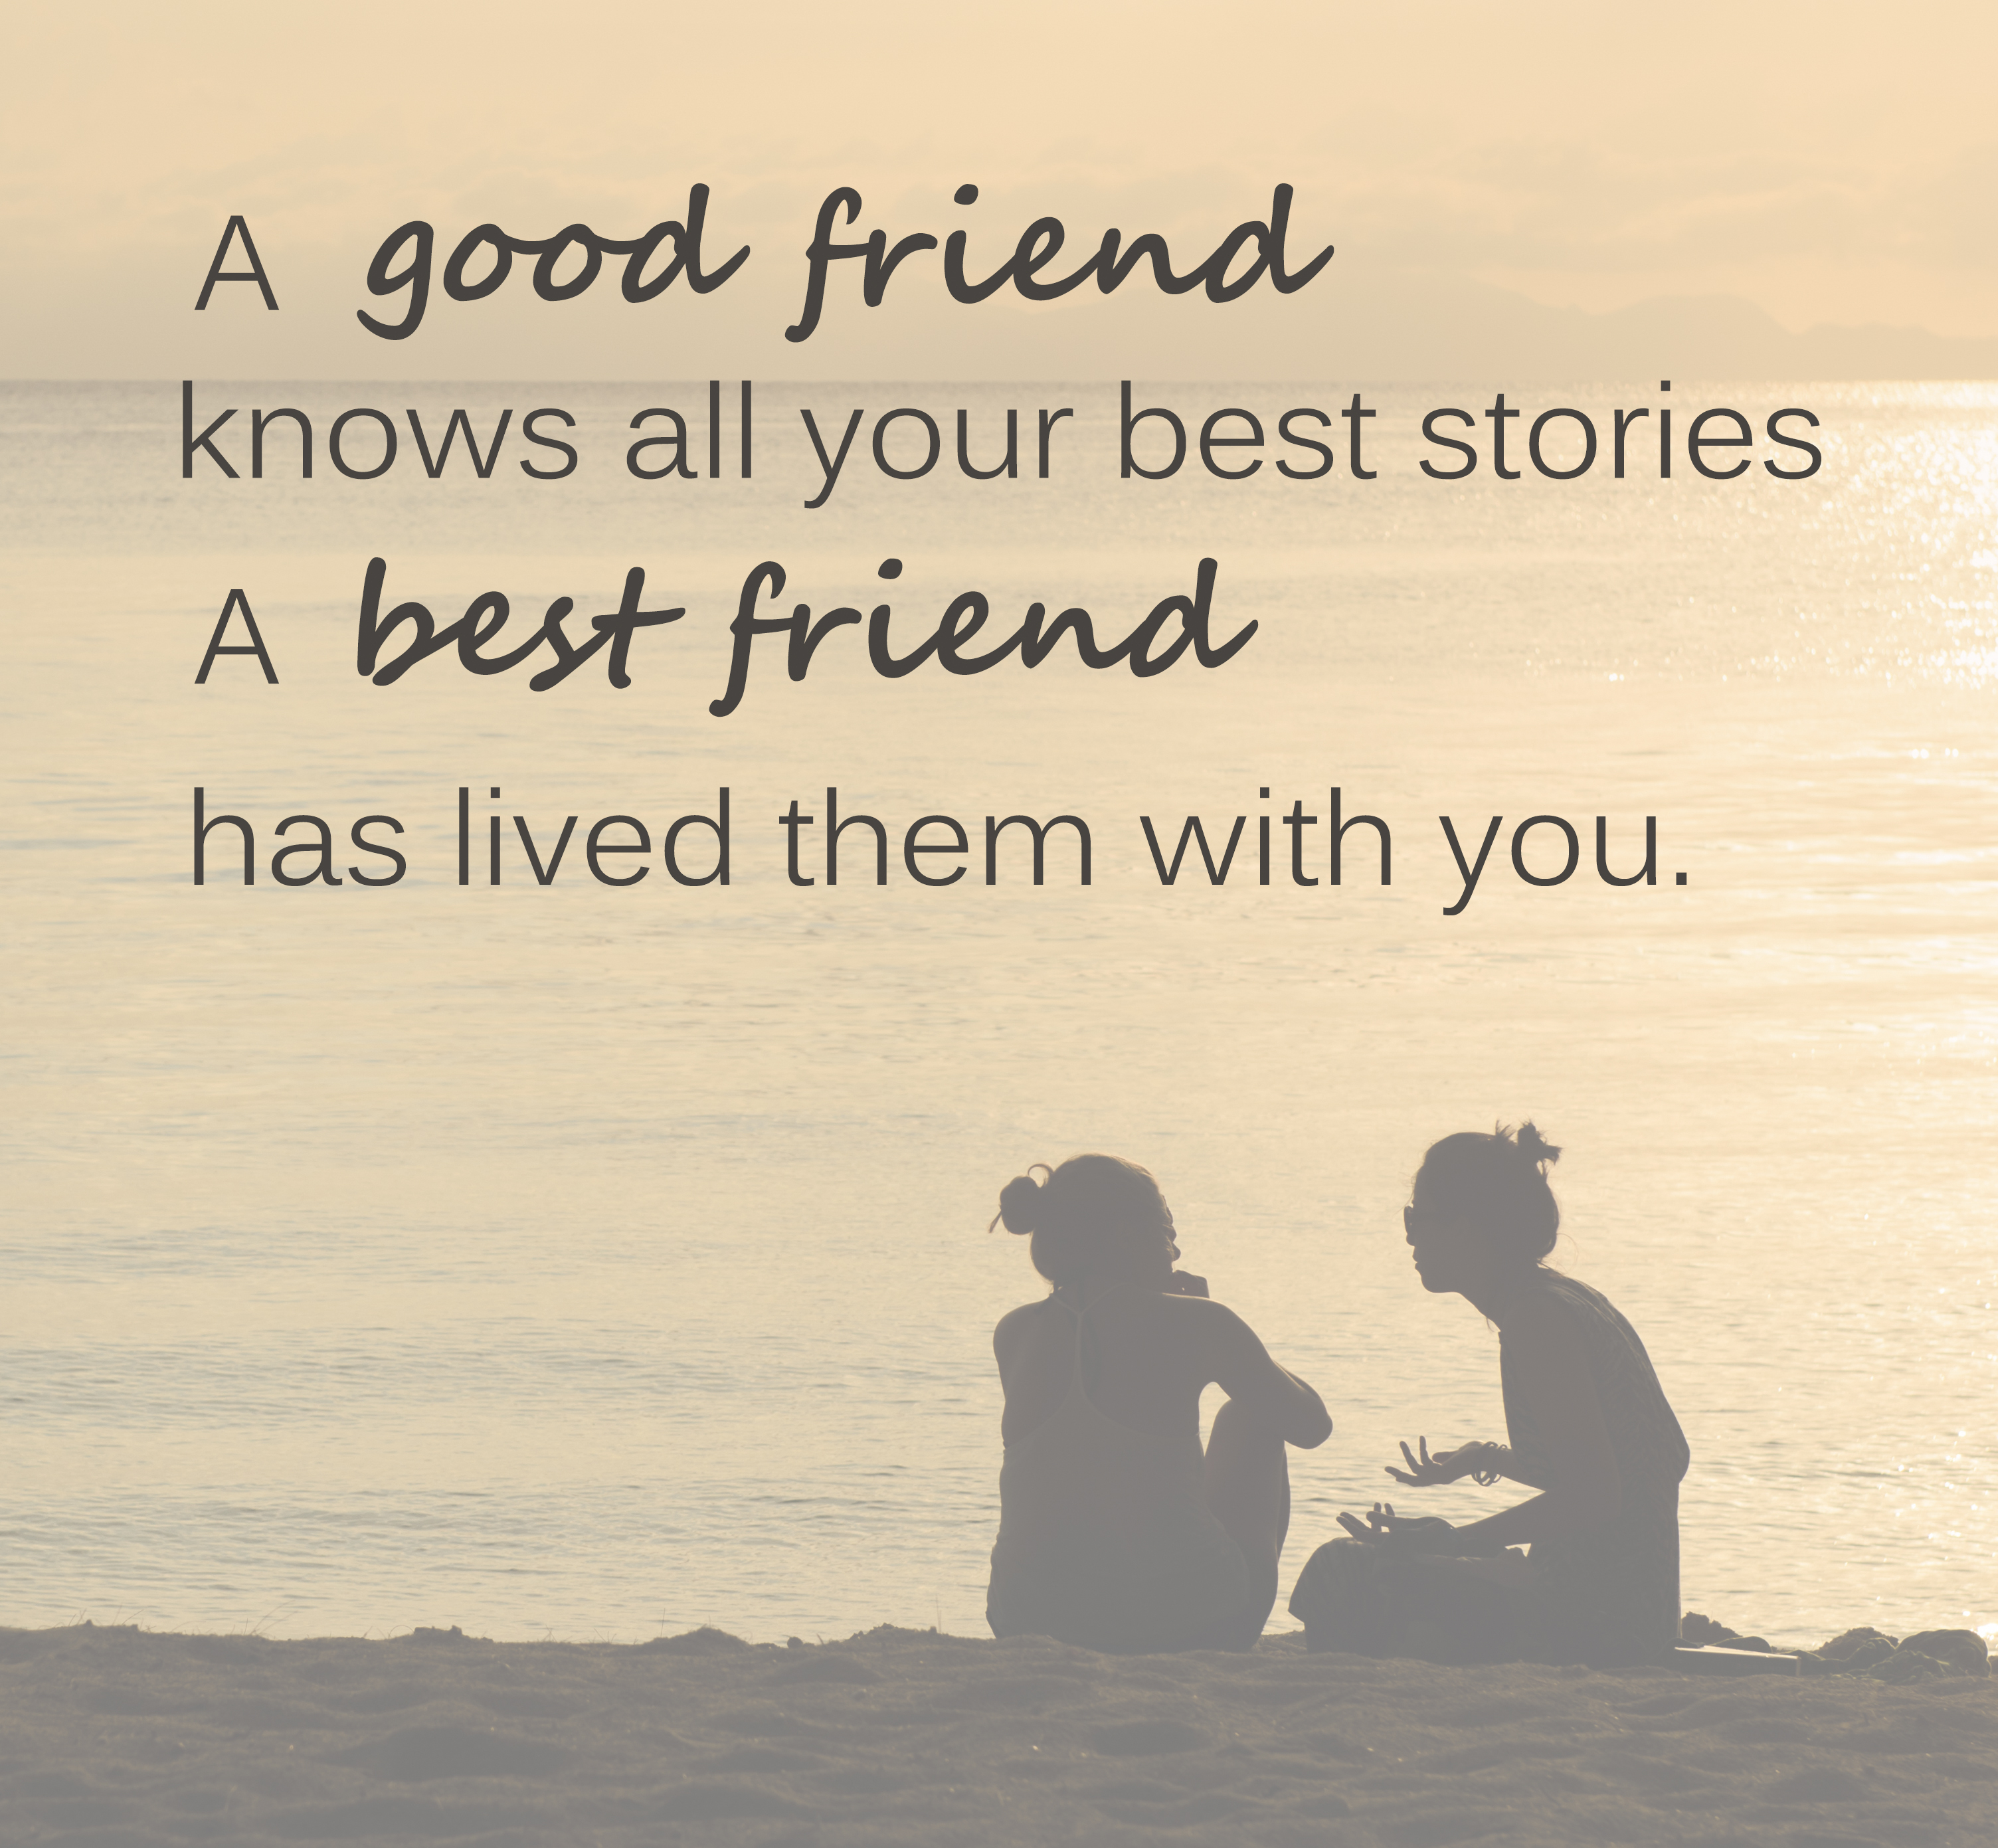 Happy National Best Friend Day 2022: Wishes, Images, Status, Quotes,  Messages and WhatsApp Greetings to Share